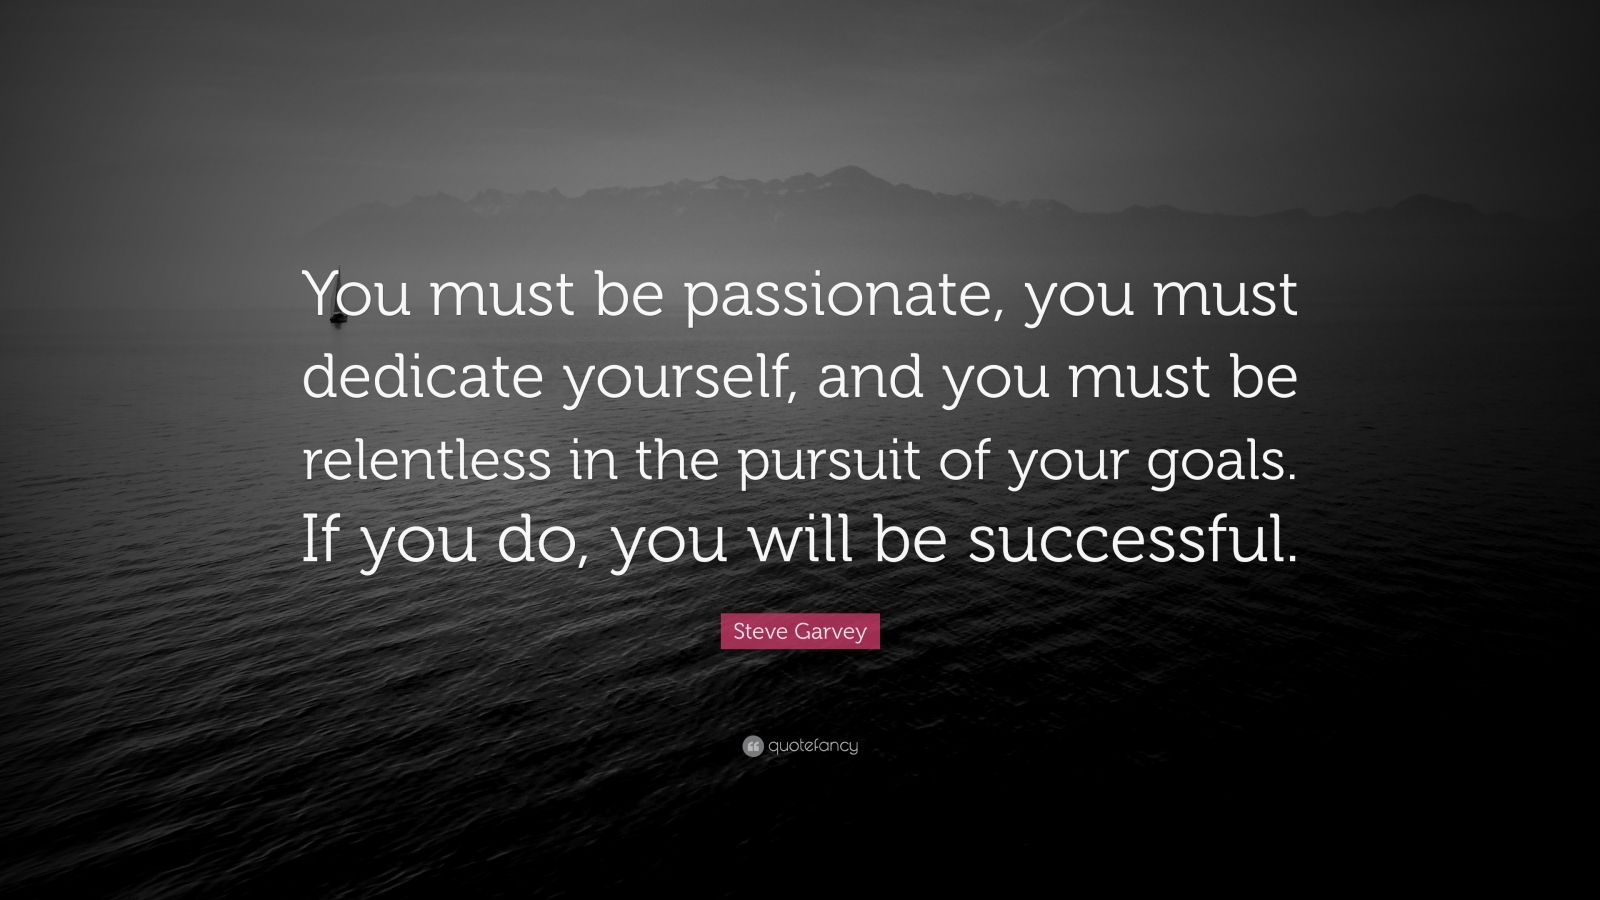 Steve Garvey Quote: “You must be passionate, you must dedicate yourself ...